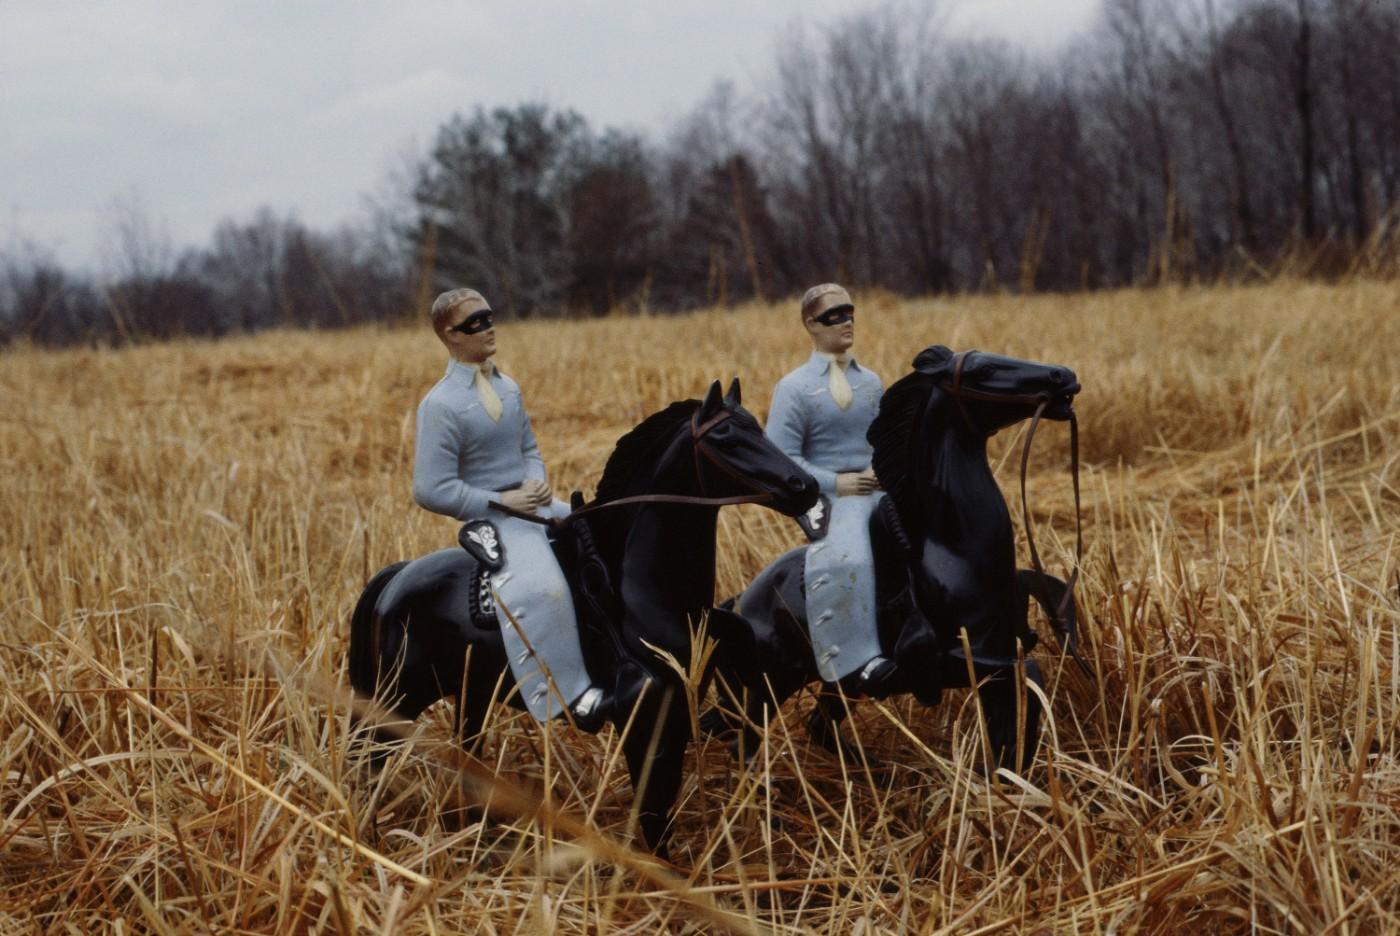 Laurie Simmons, Brothers/Horizon, 1979